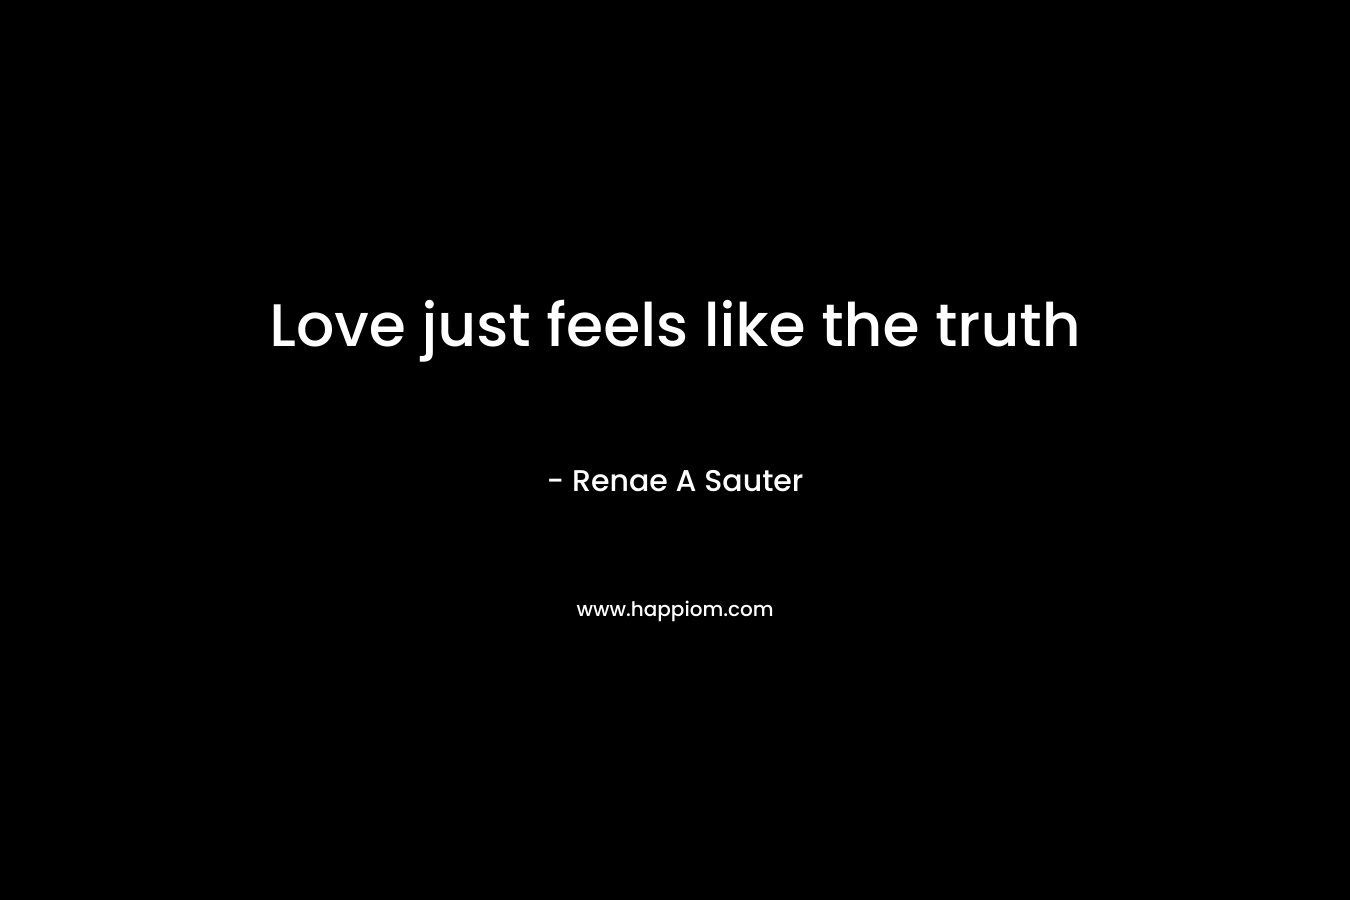 Love just feels like the truth